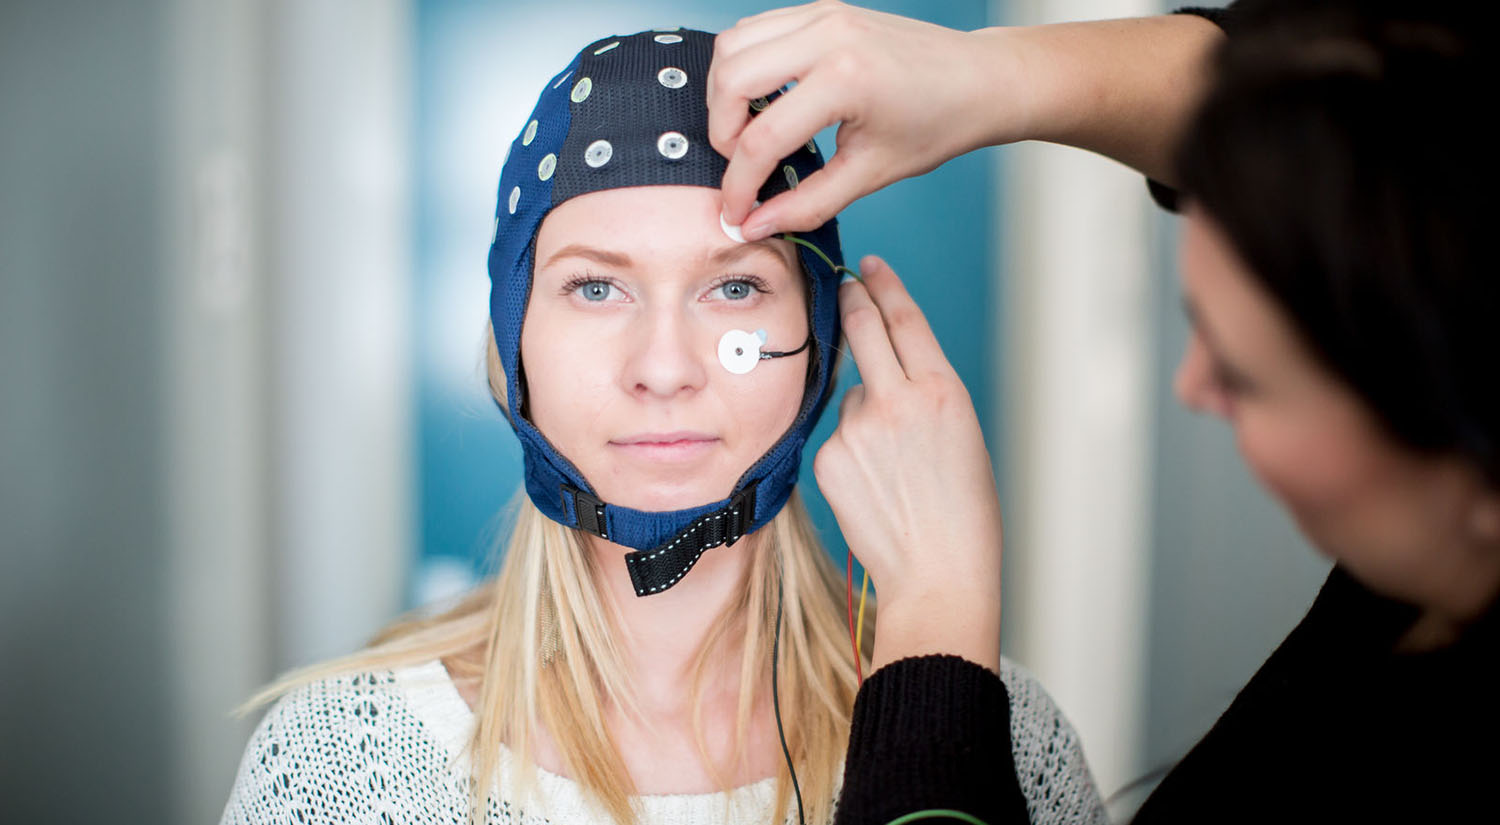 Woman being fitted with head sensor laboratory equipment